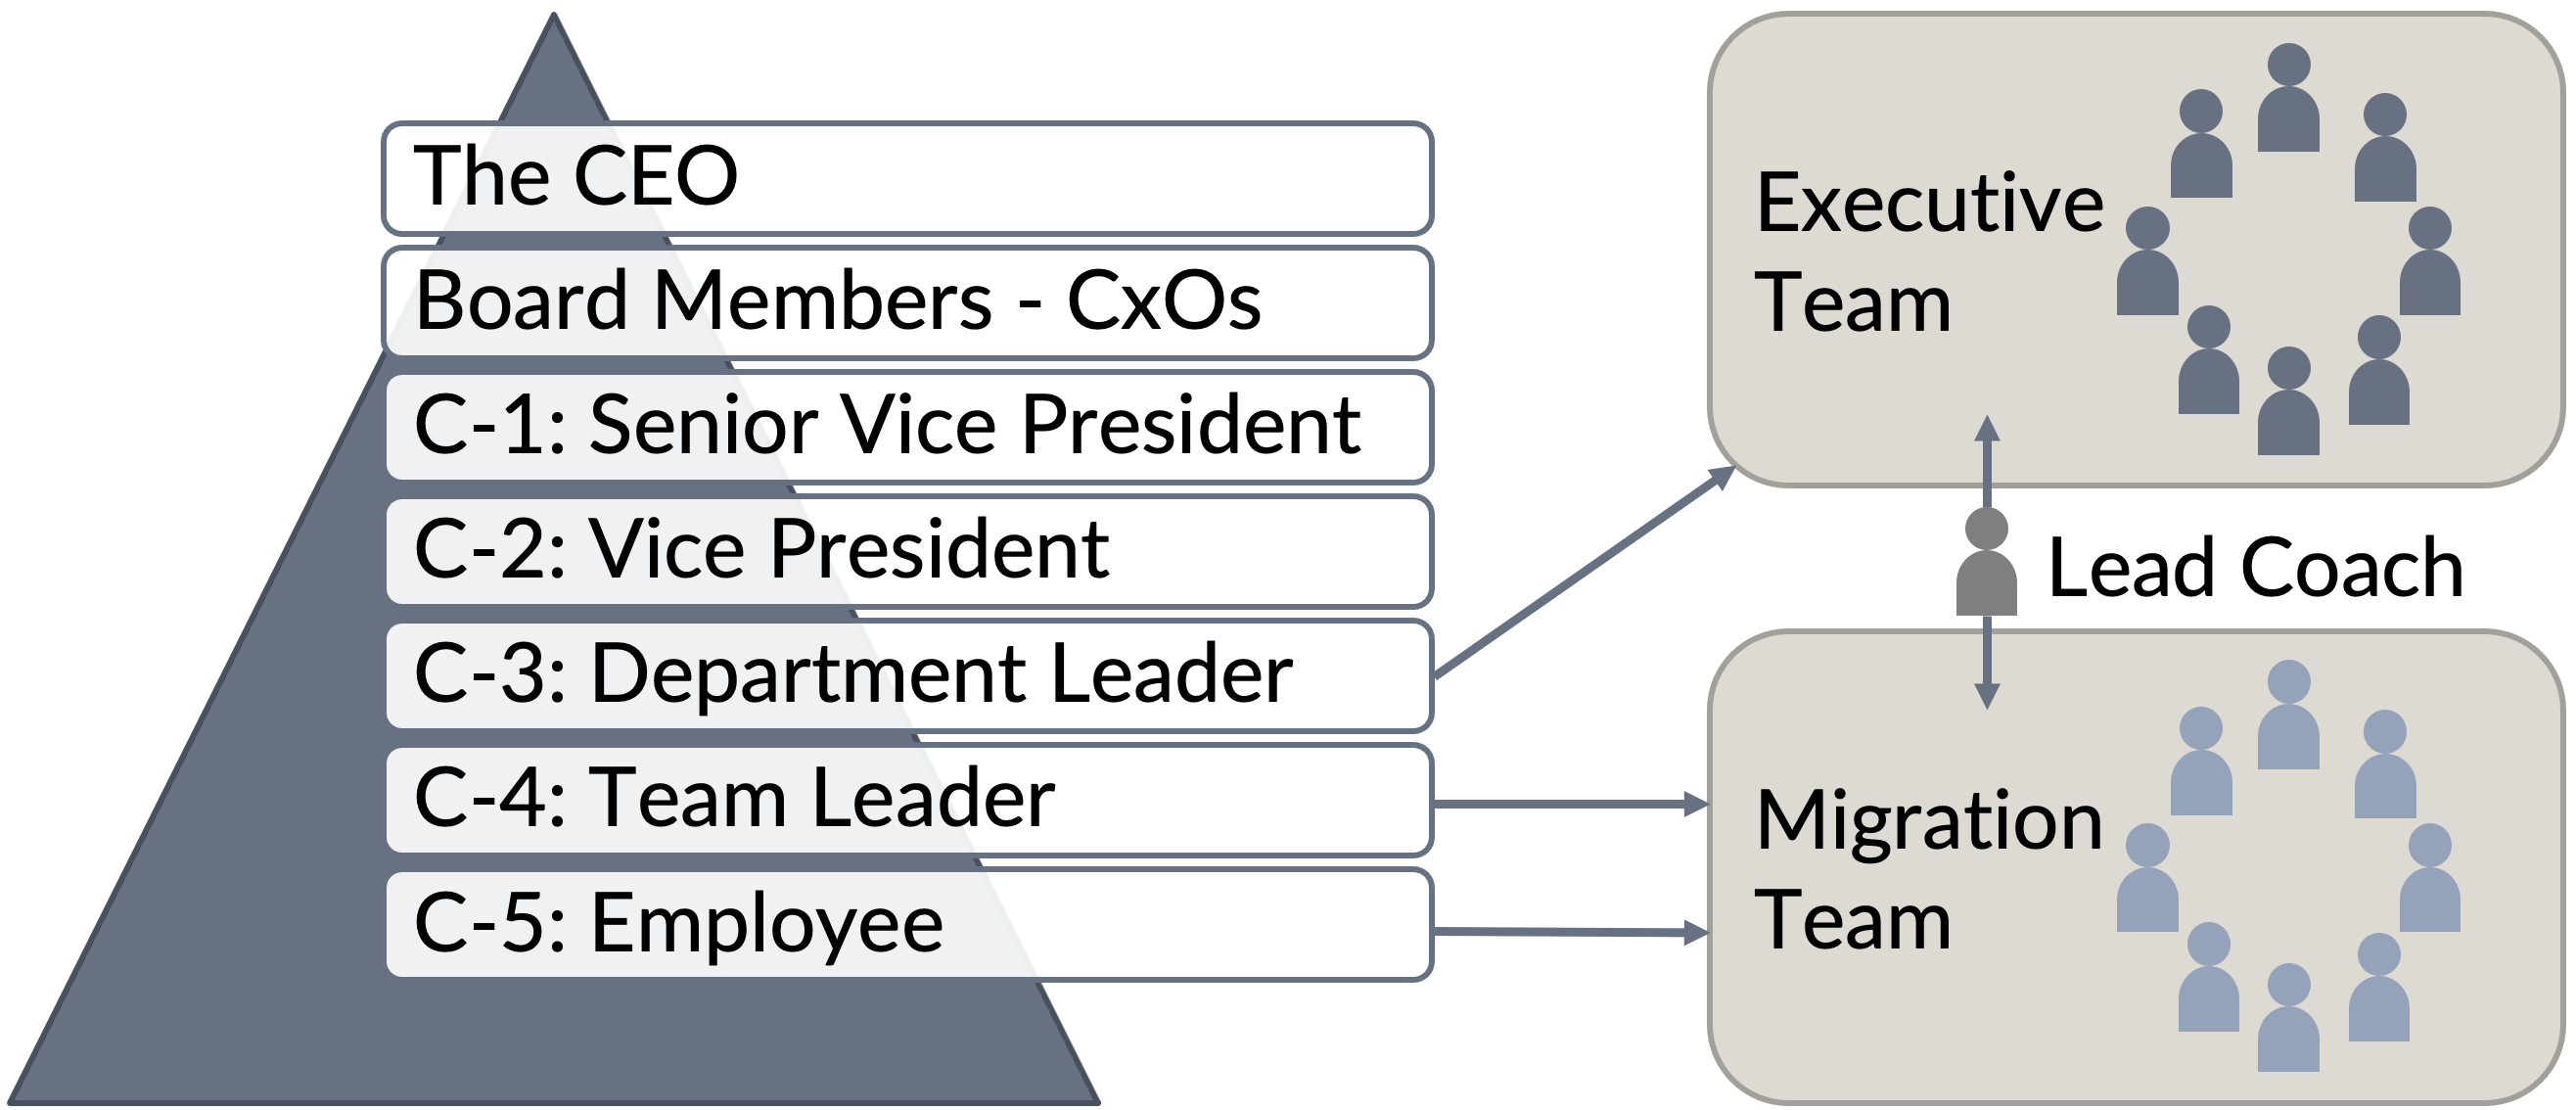 Teams covering the whole organizational system. Stakeholders and interface partners not shown.